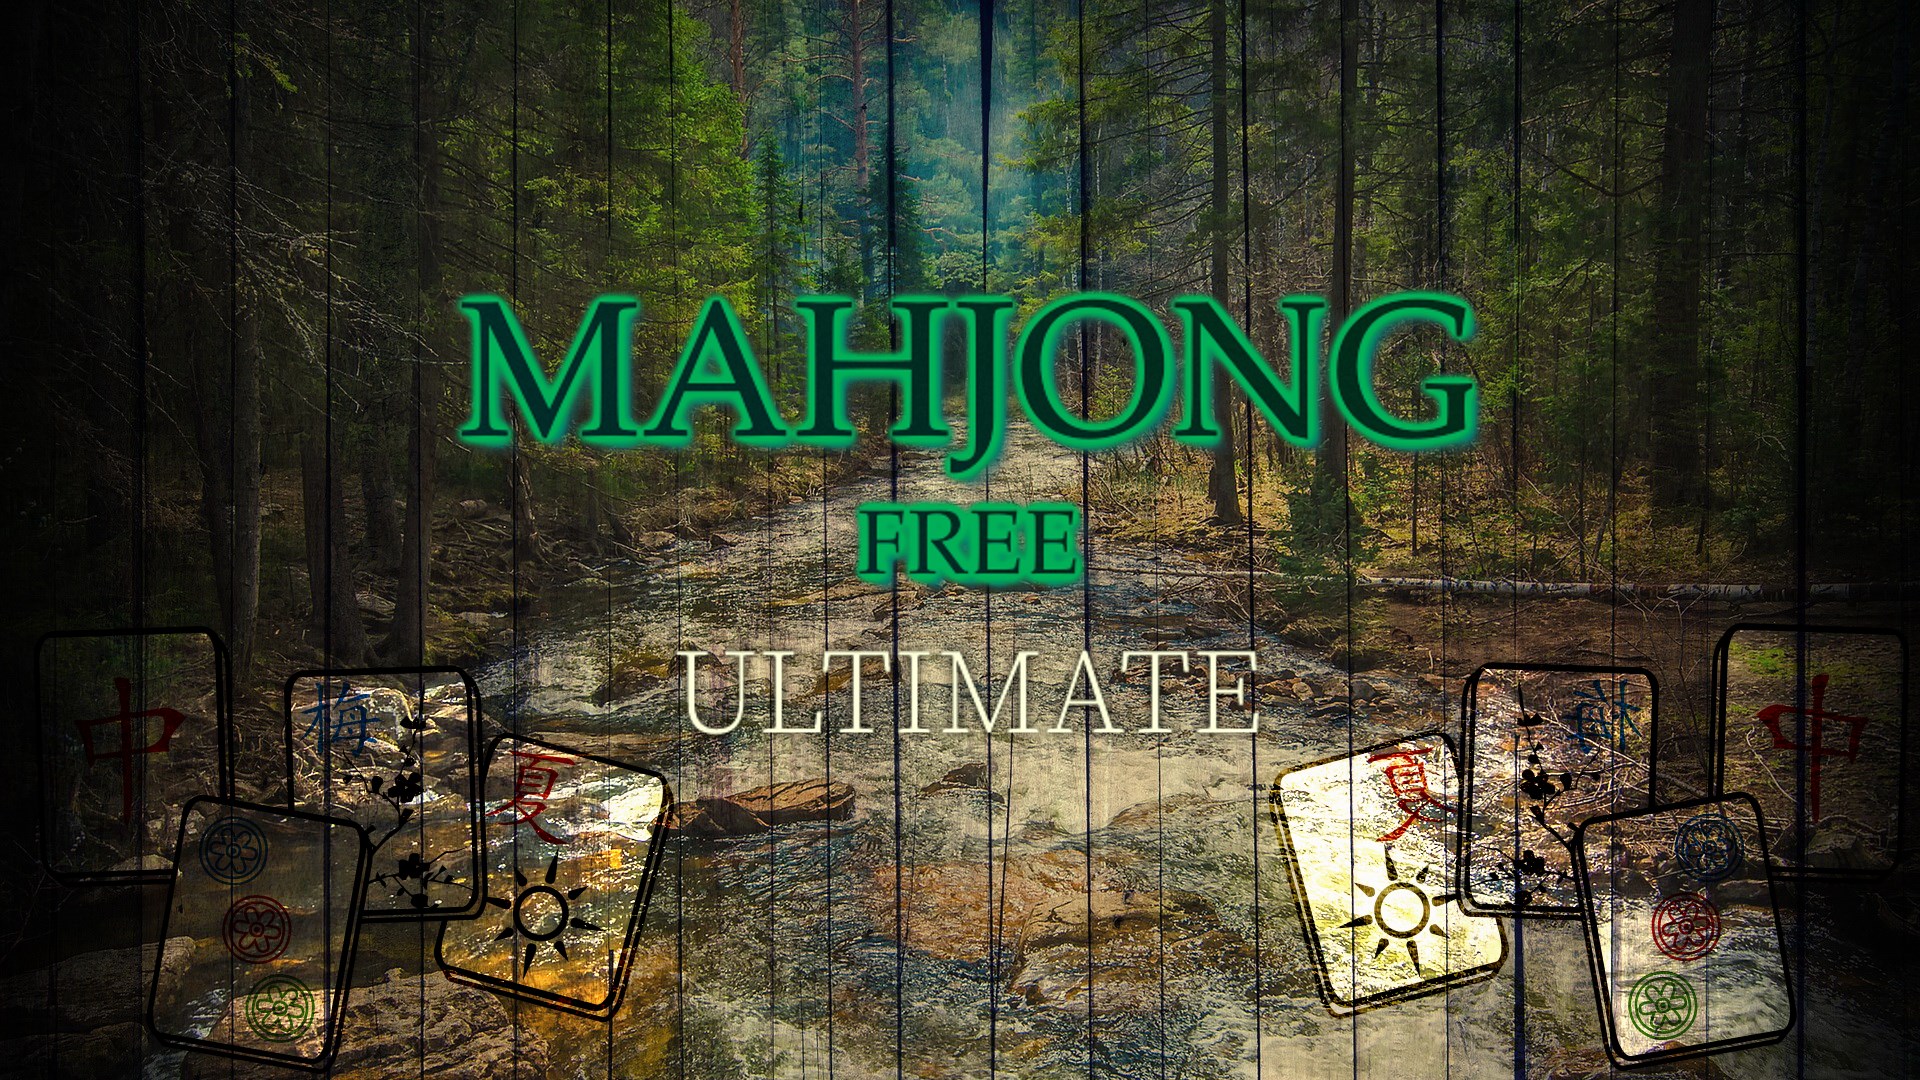 Gratis Mahjong solitaire for Windows, which is *NOT* from the Microsoft app  store - Software Recommendations Stack Exchange